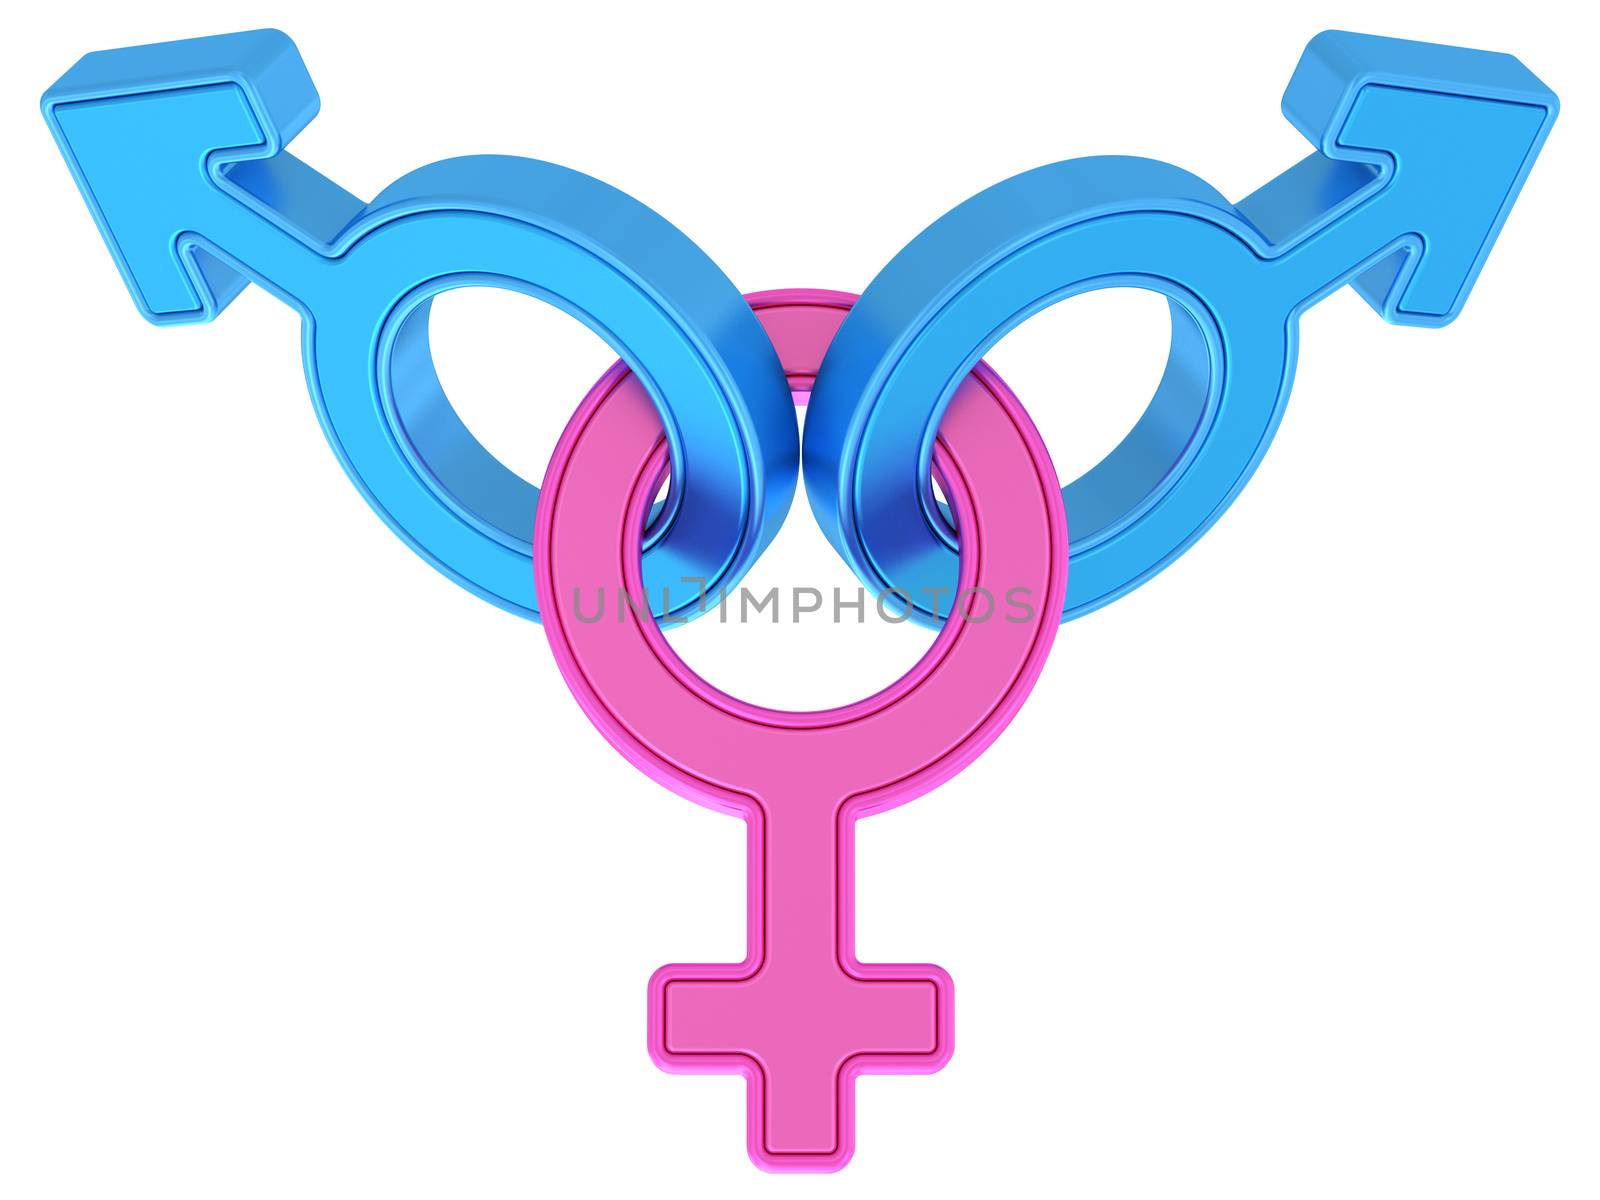 Female and two male gender symbols chained together on white background. High resolution 3D image